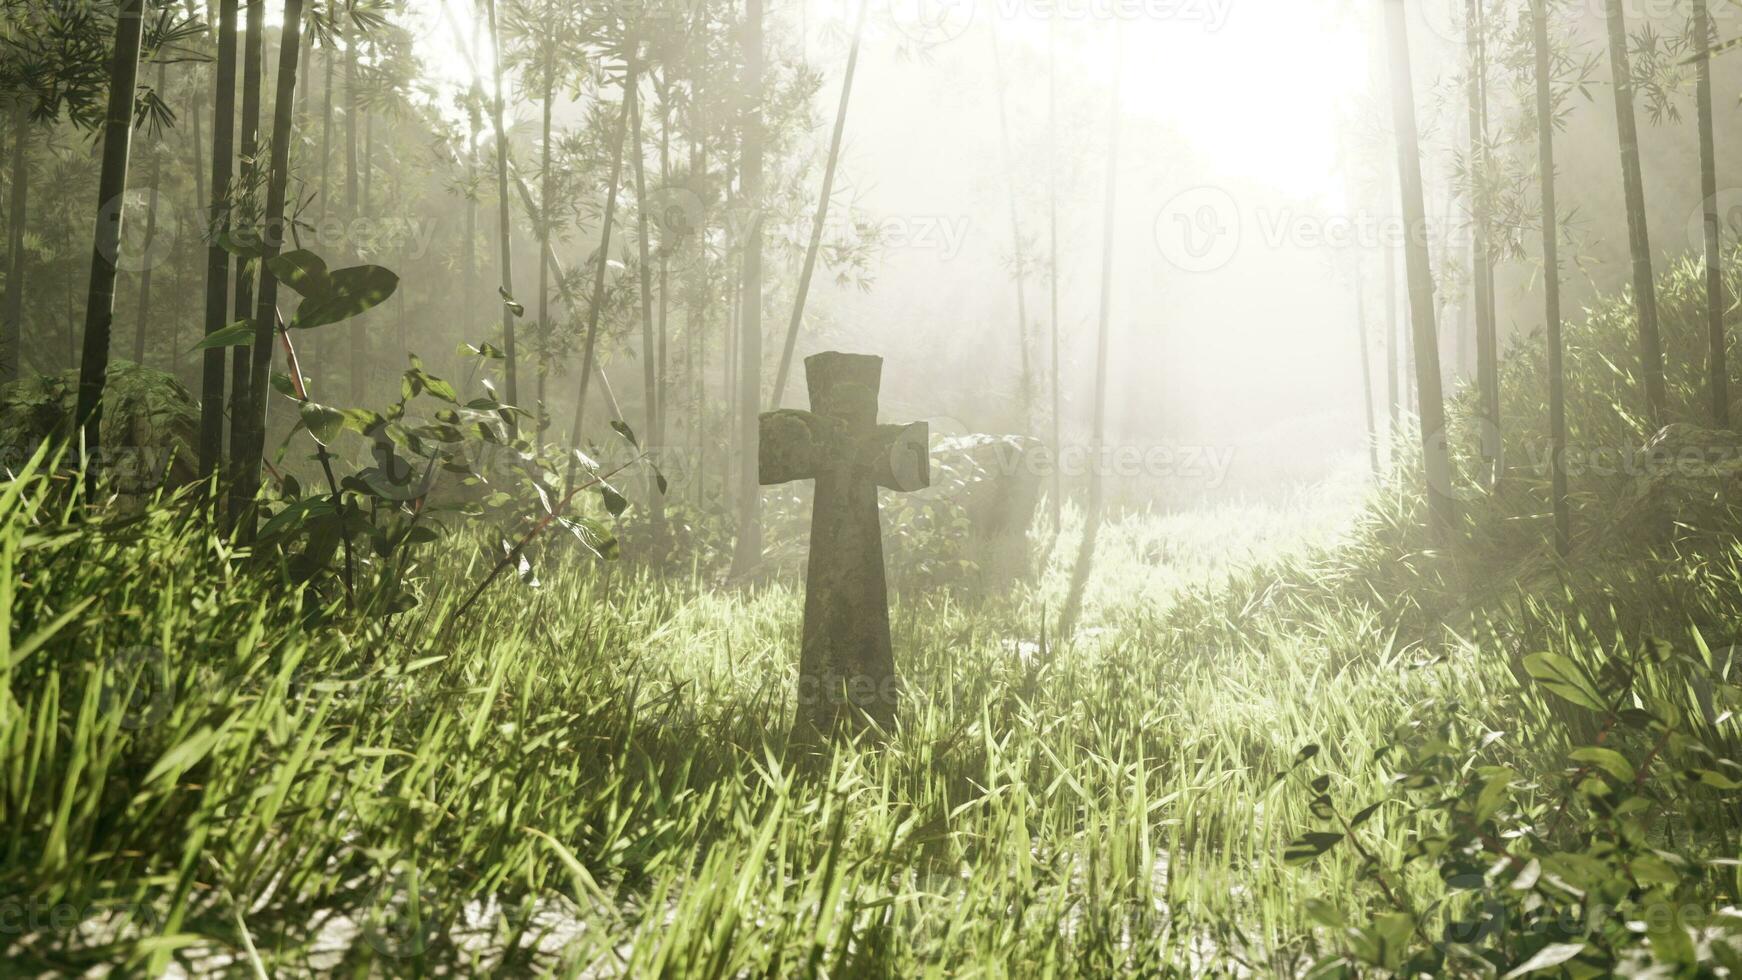 mossy cross marking a burial site in the jungle photo